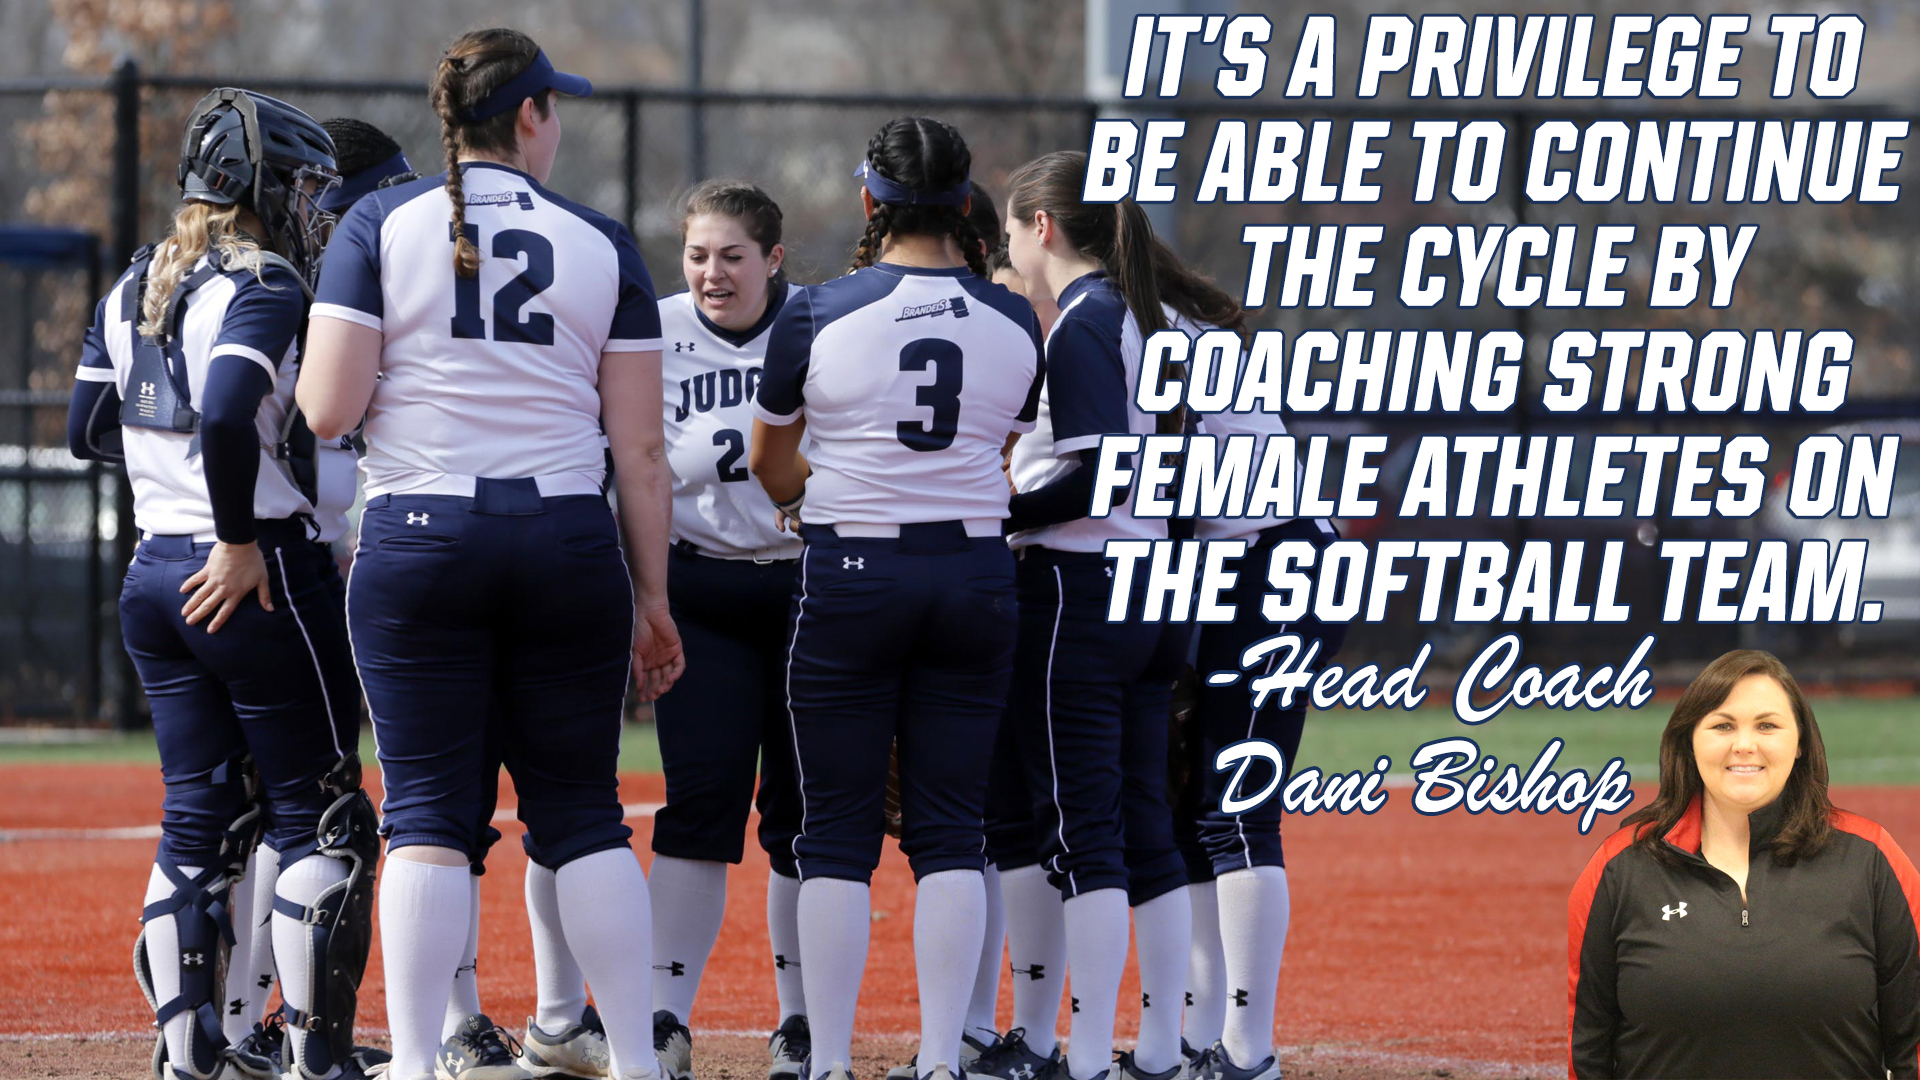 Softball team in conference, with text from head coach Dani Bishop: It's a privilege to be able to continue the cycle by coaching strong female athletes on the softball team. 